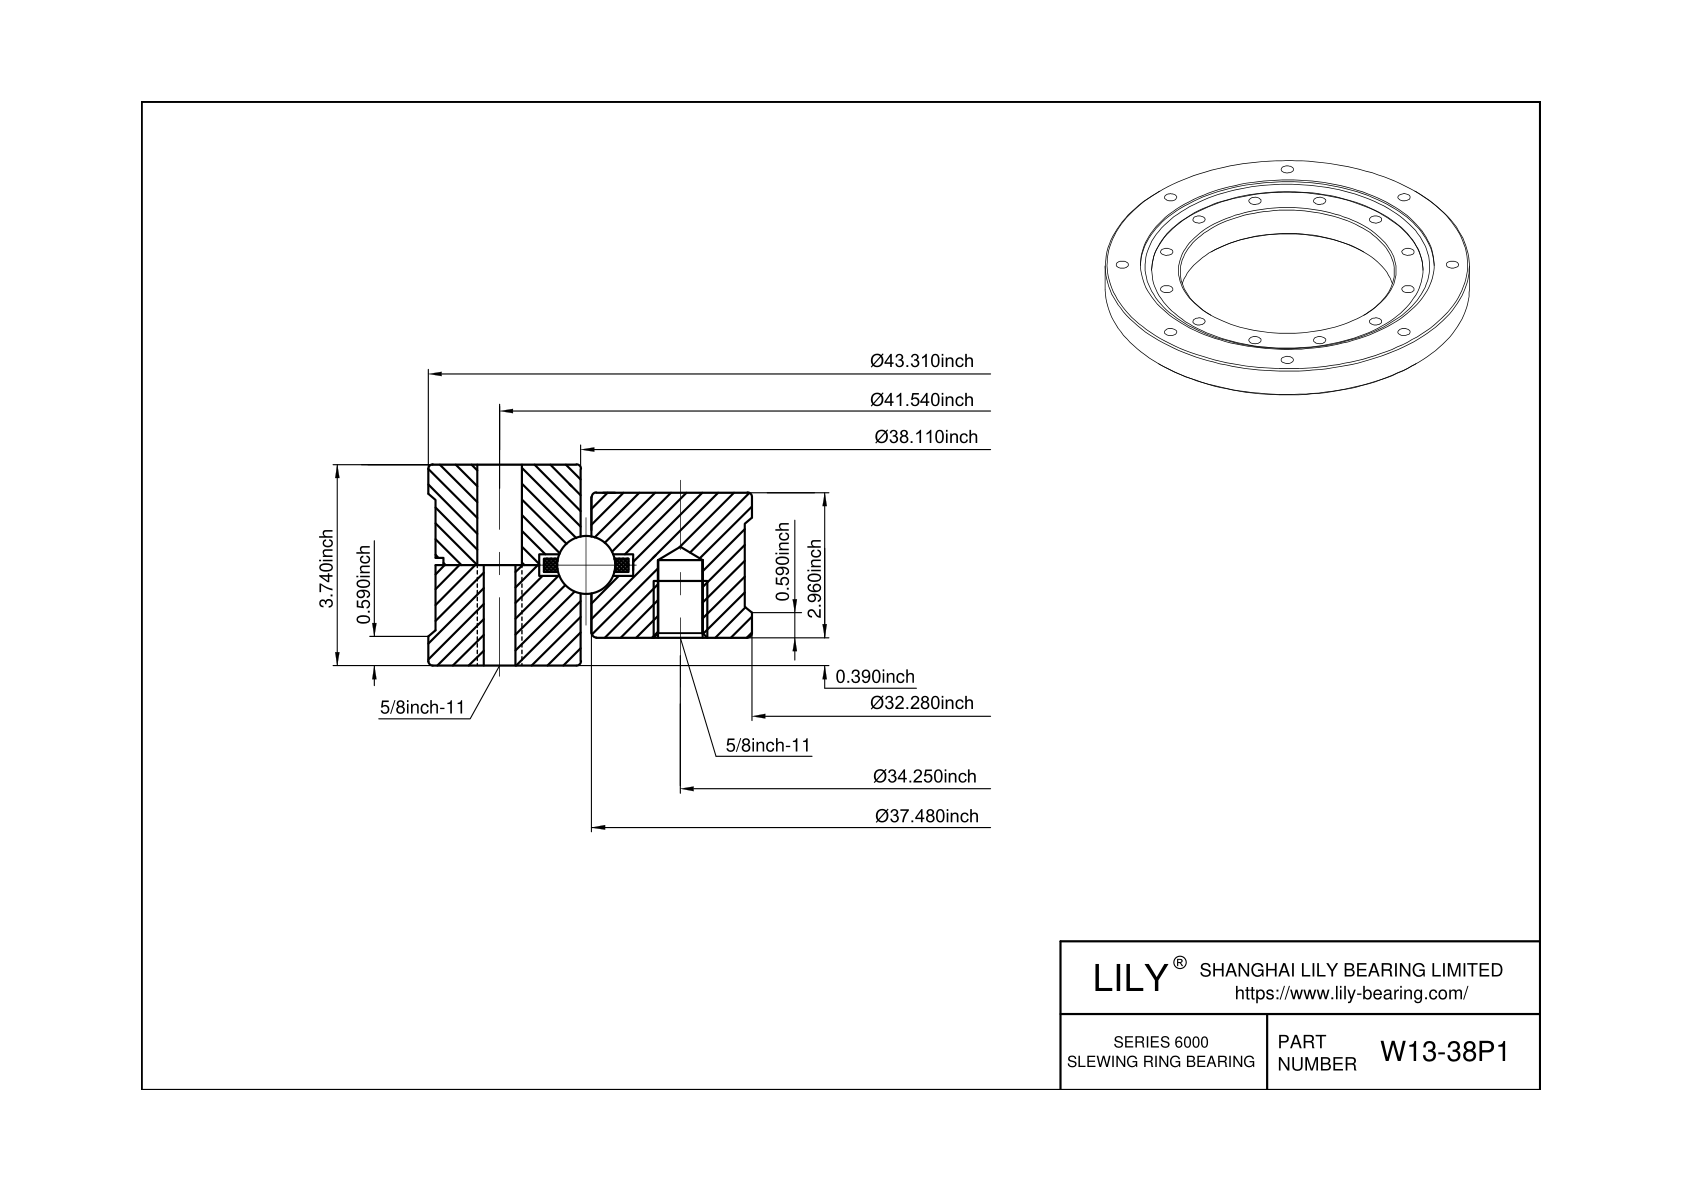 W13-38P1 6000 Series cad drawing